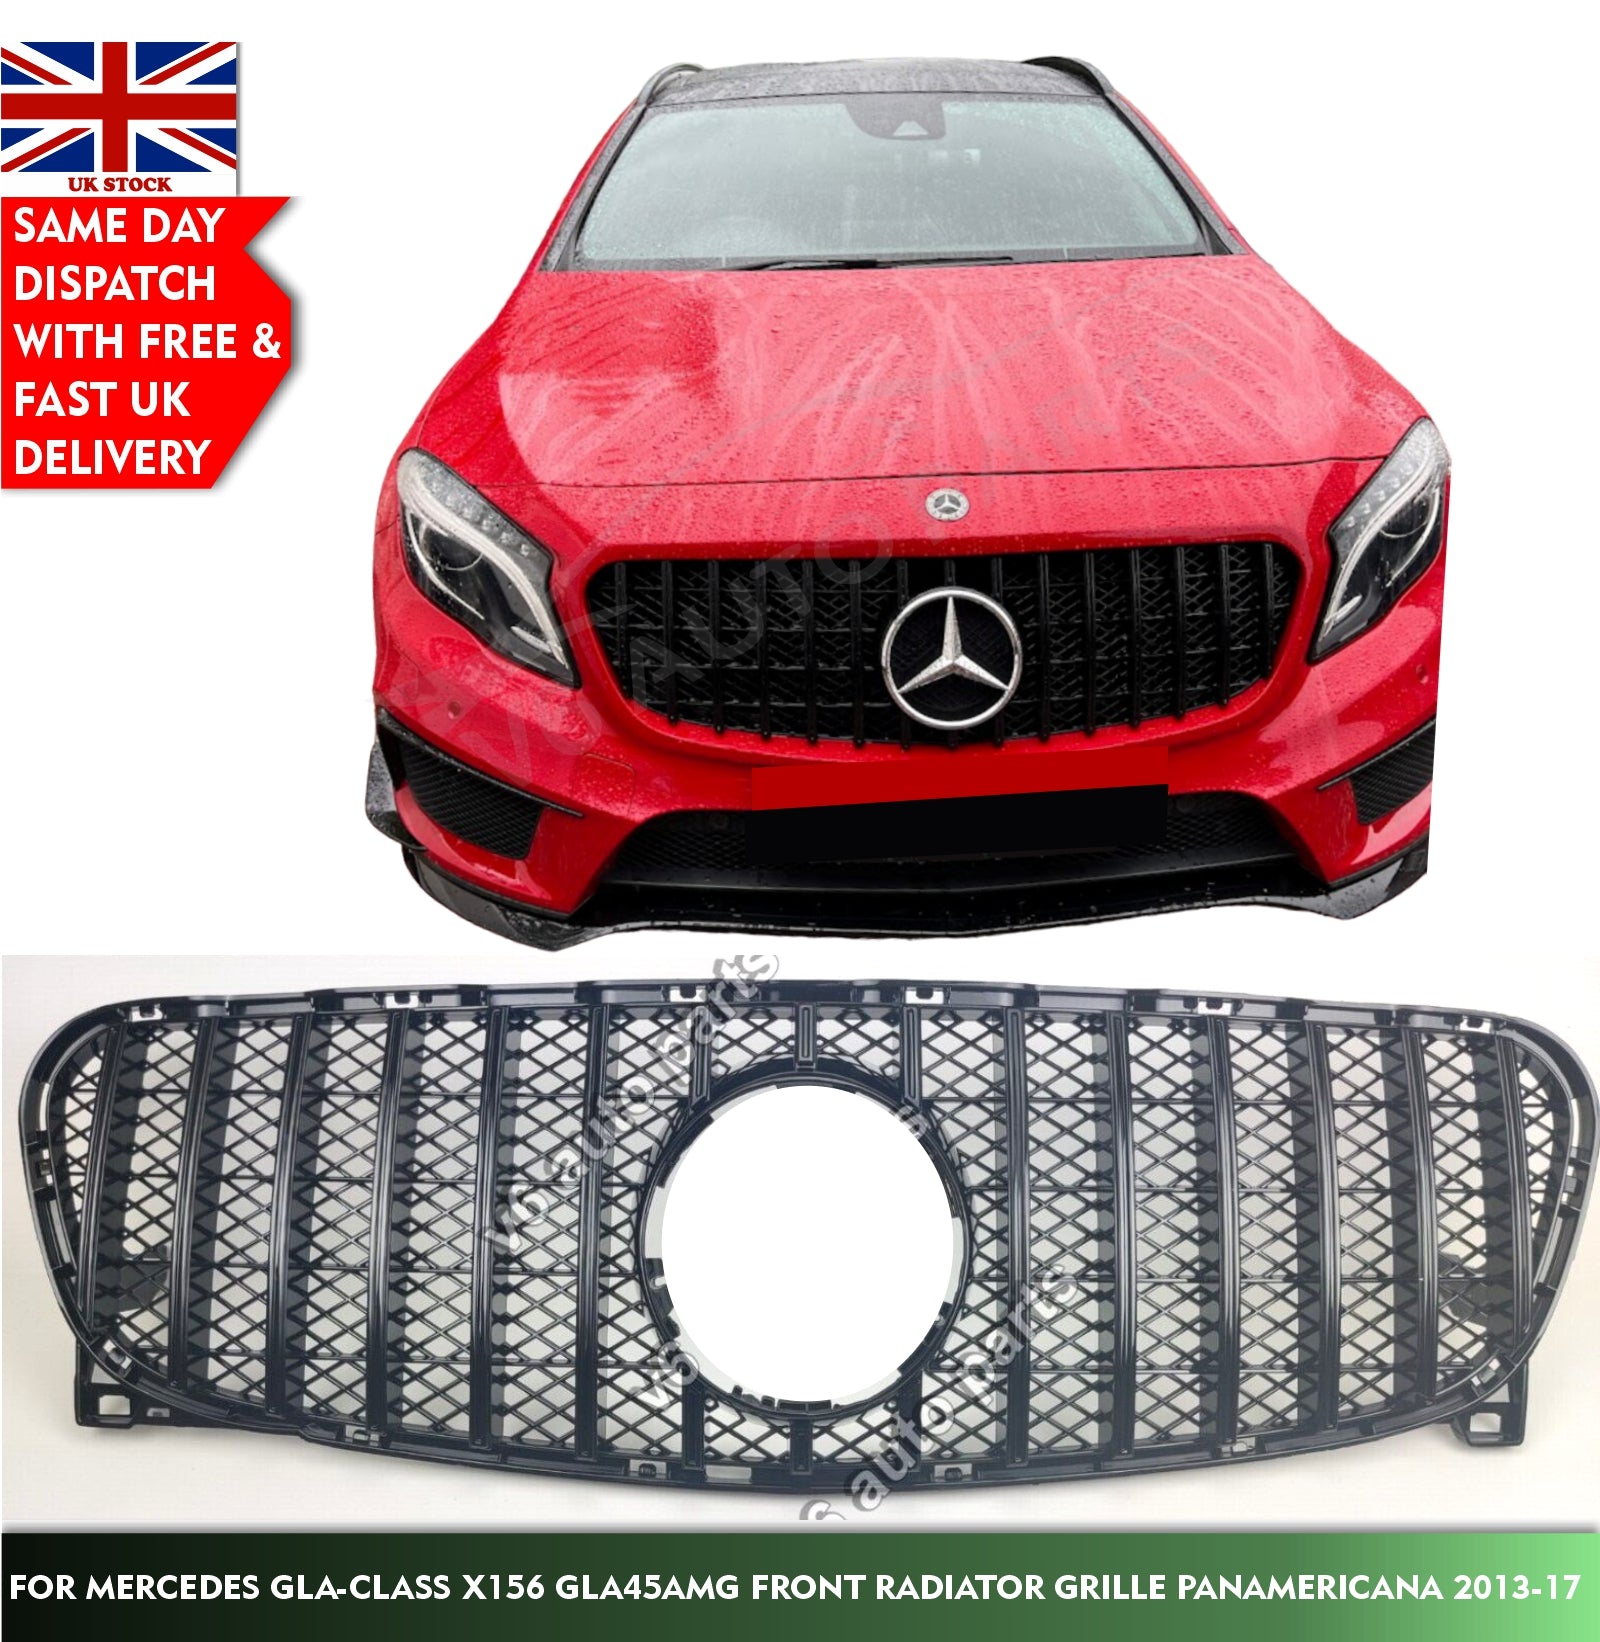 For Mercedes GLA-Class W156 GLA45 Front Radiator GT Grille 2013-17 Panamericana